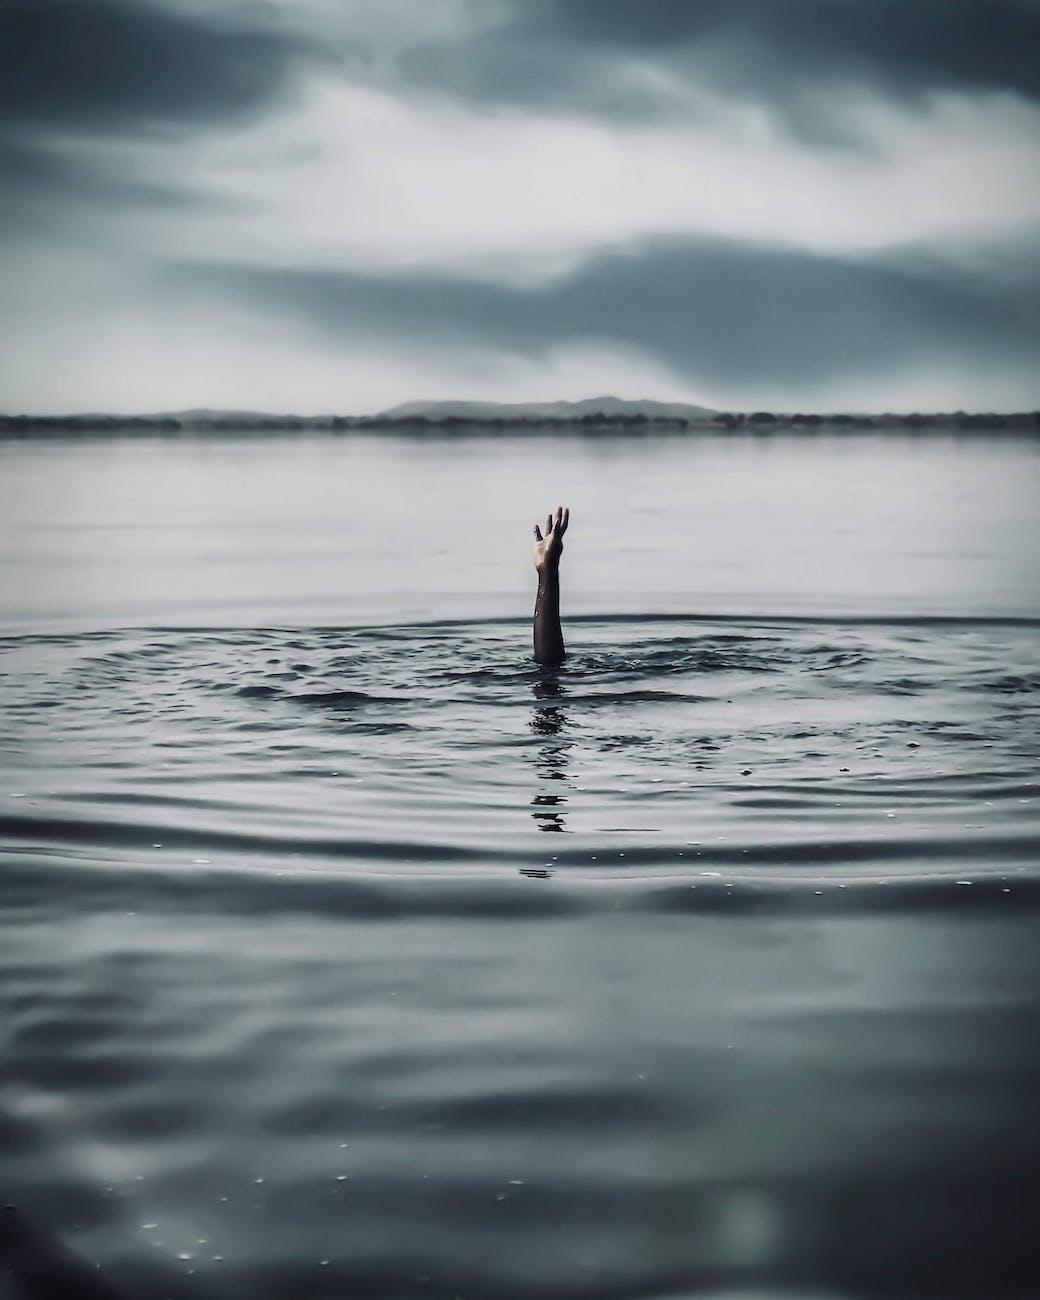 hand reaching out of a person drowning in water